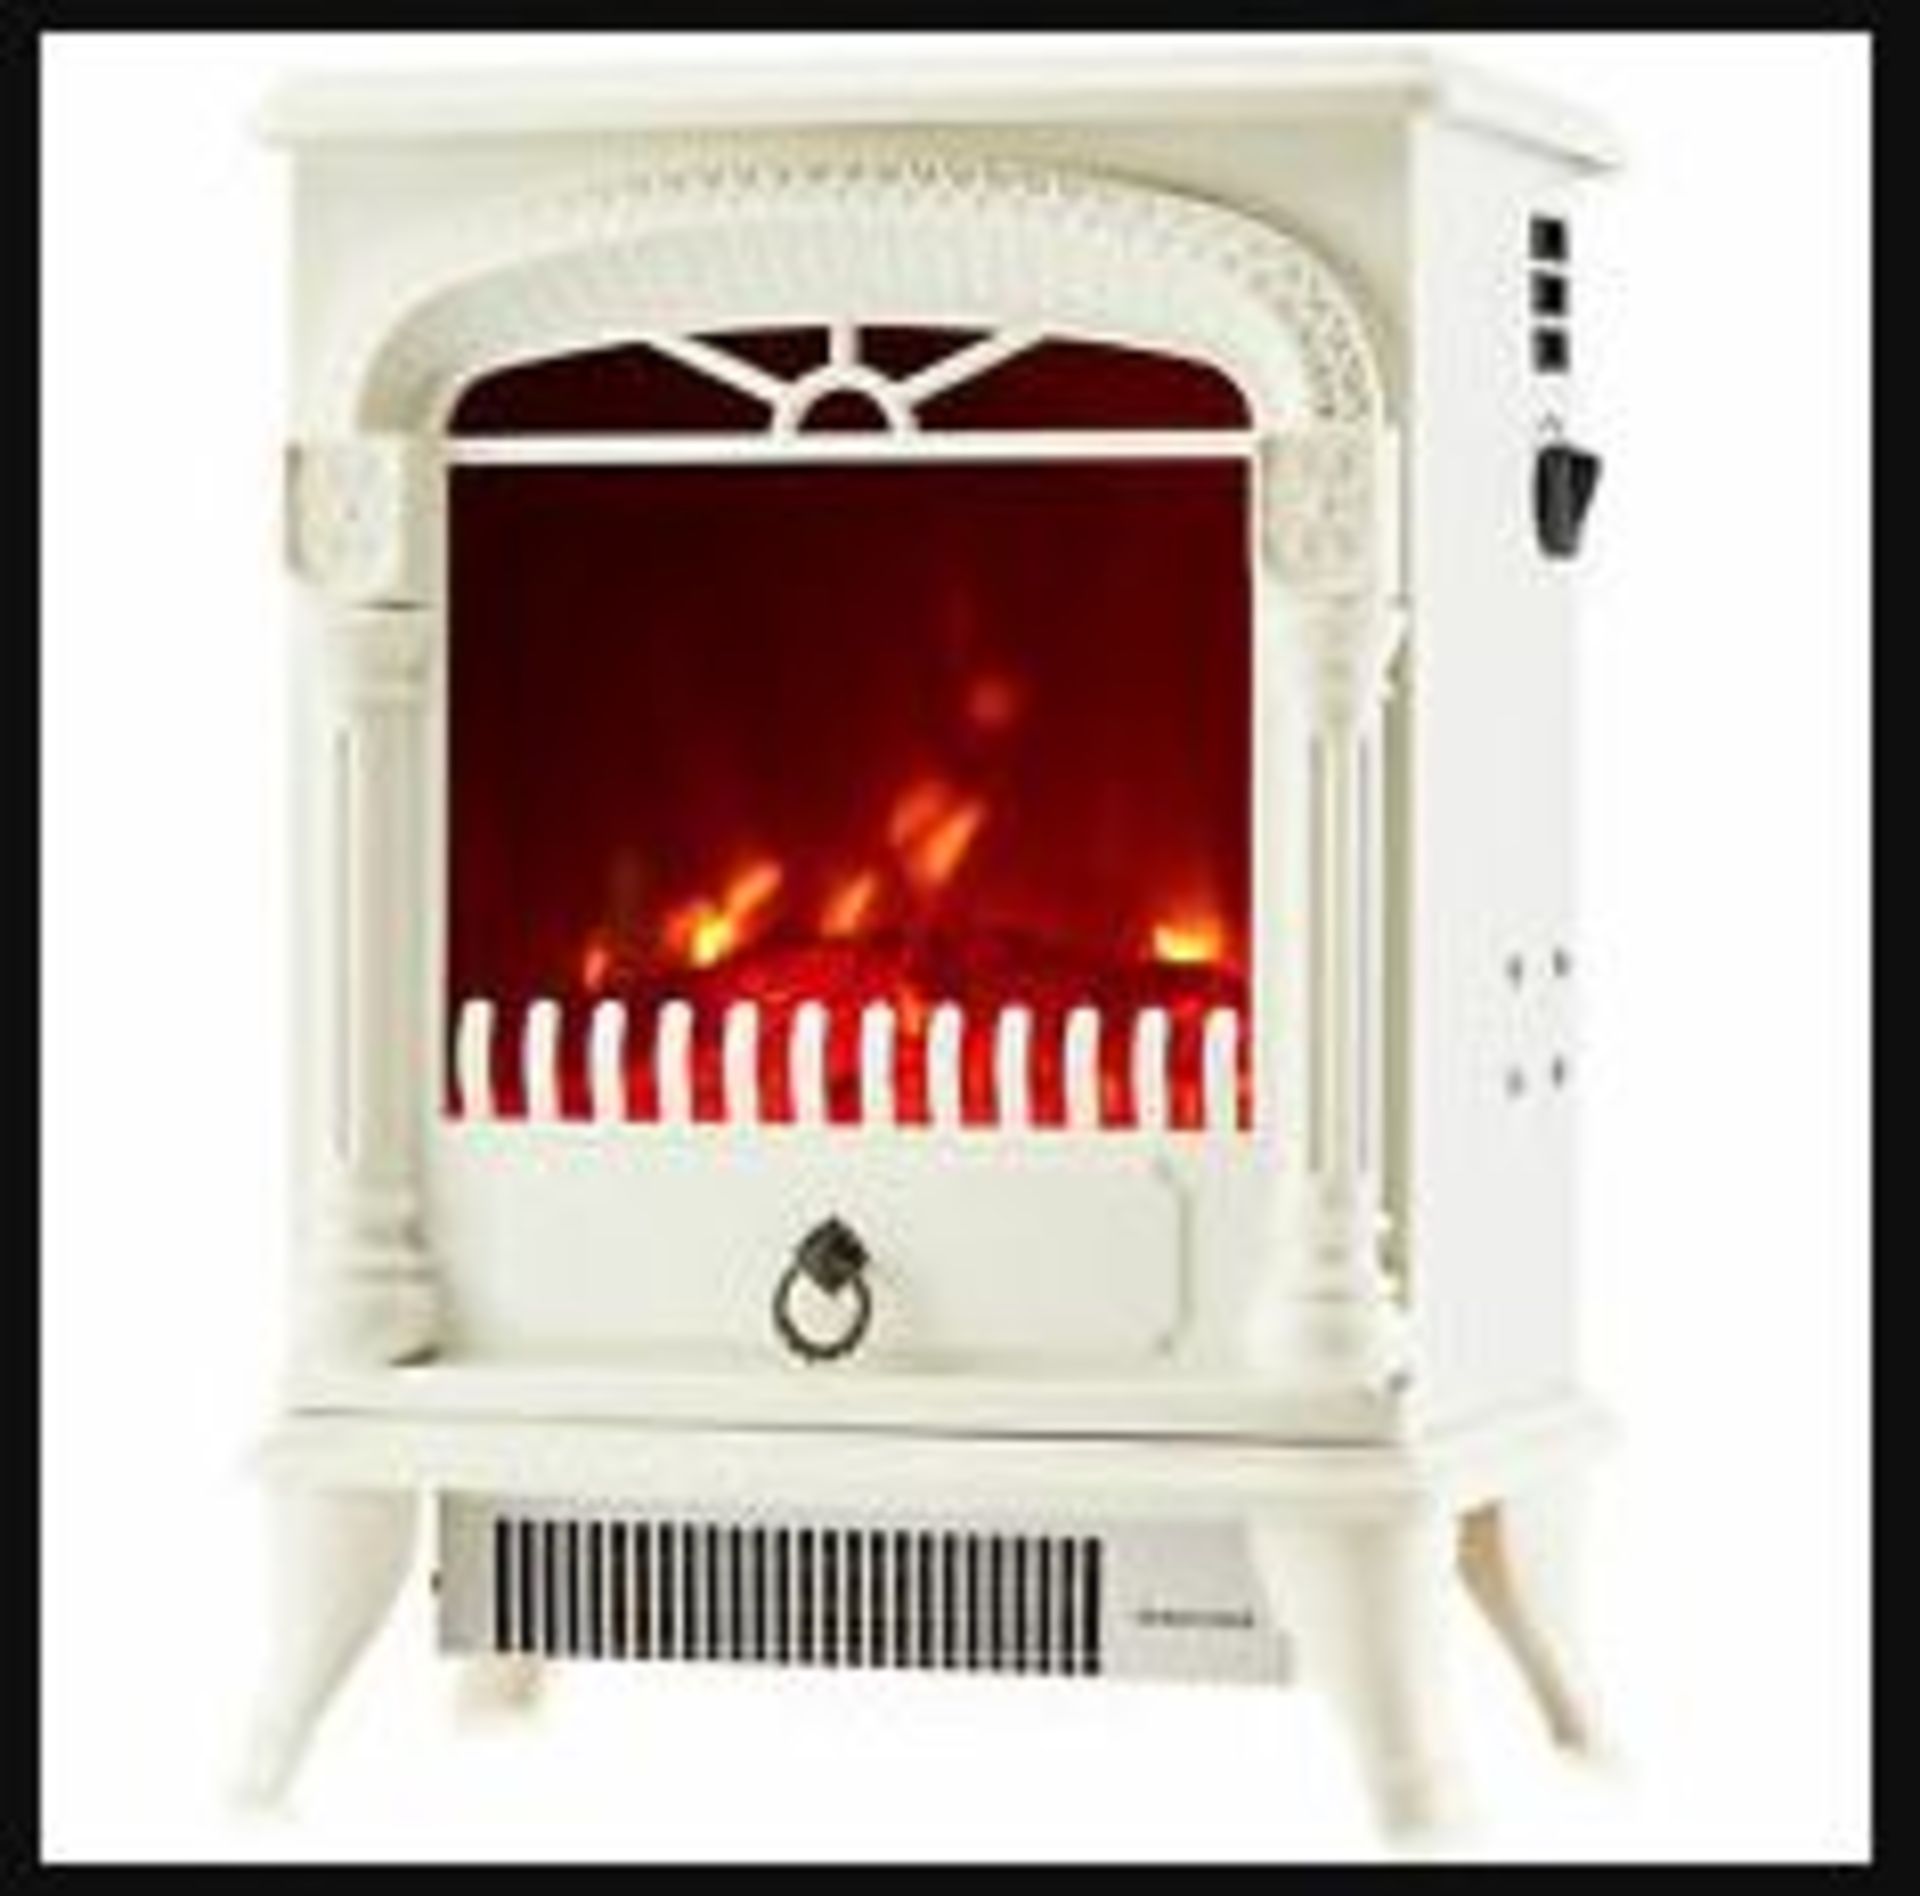 (R7N) 2x Arlec 2000W Electric Stove Heater With Realistic Log Flame Effect White Finish (No Boxes